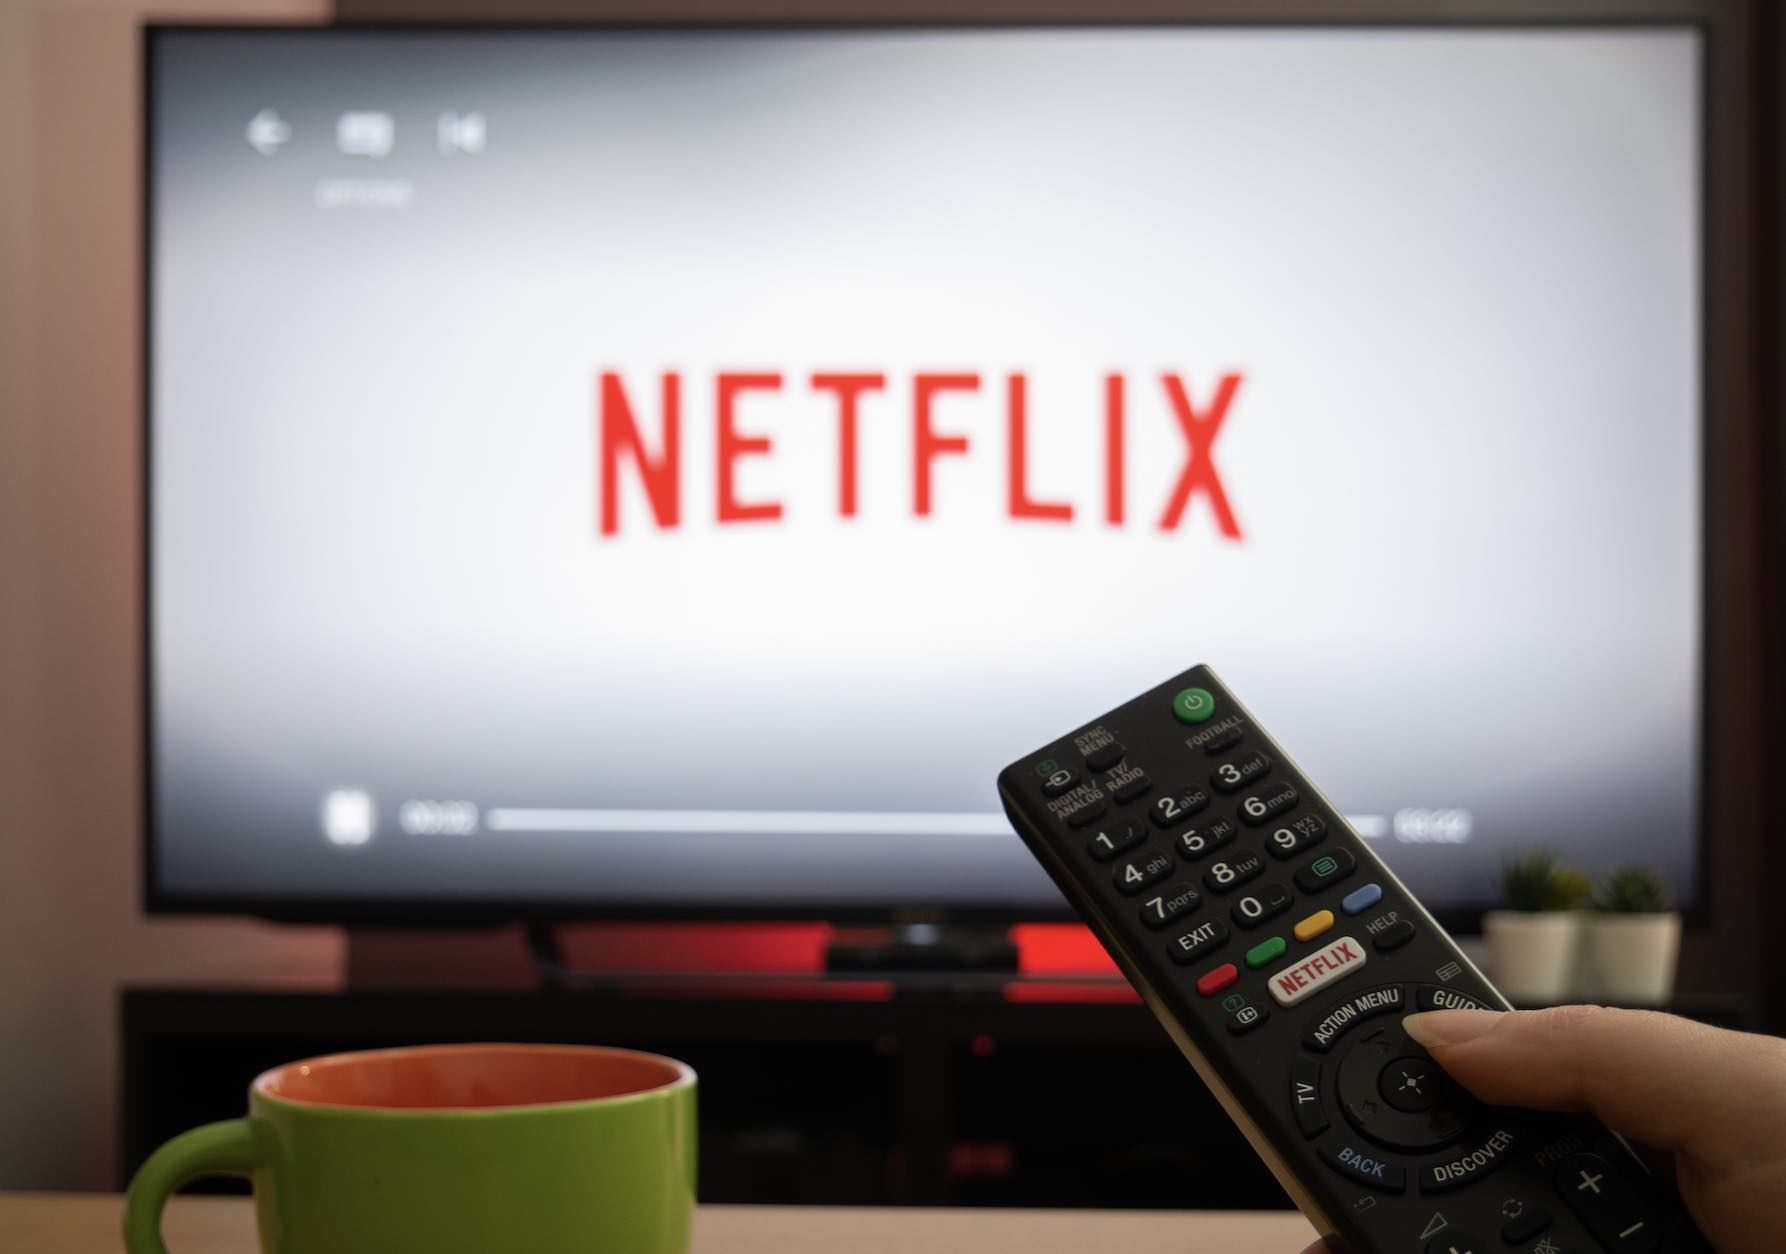 How to watch US Netflix with a VPN – get three months free!